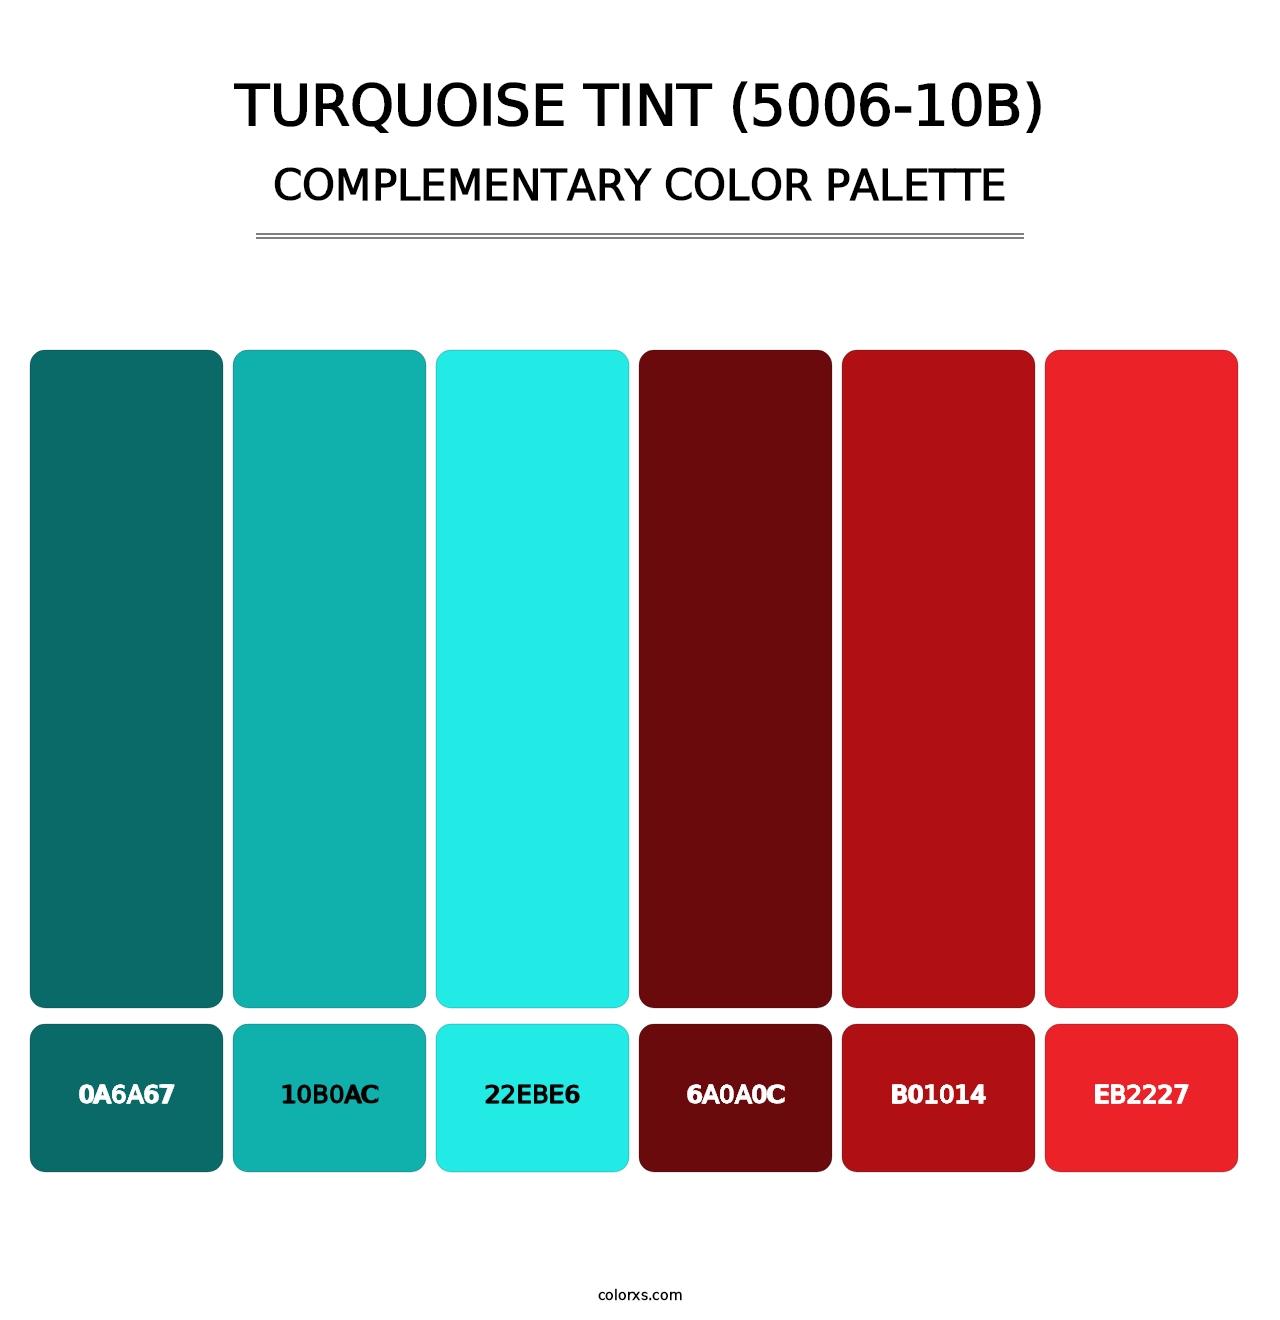 Turquoise Tint (5006-10B) - Complementary Color Palette